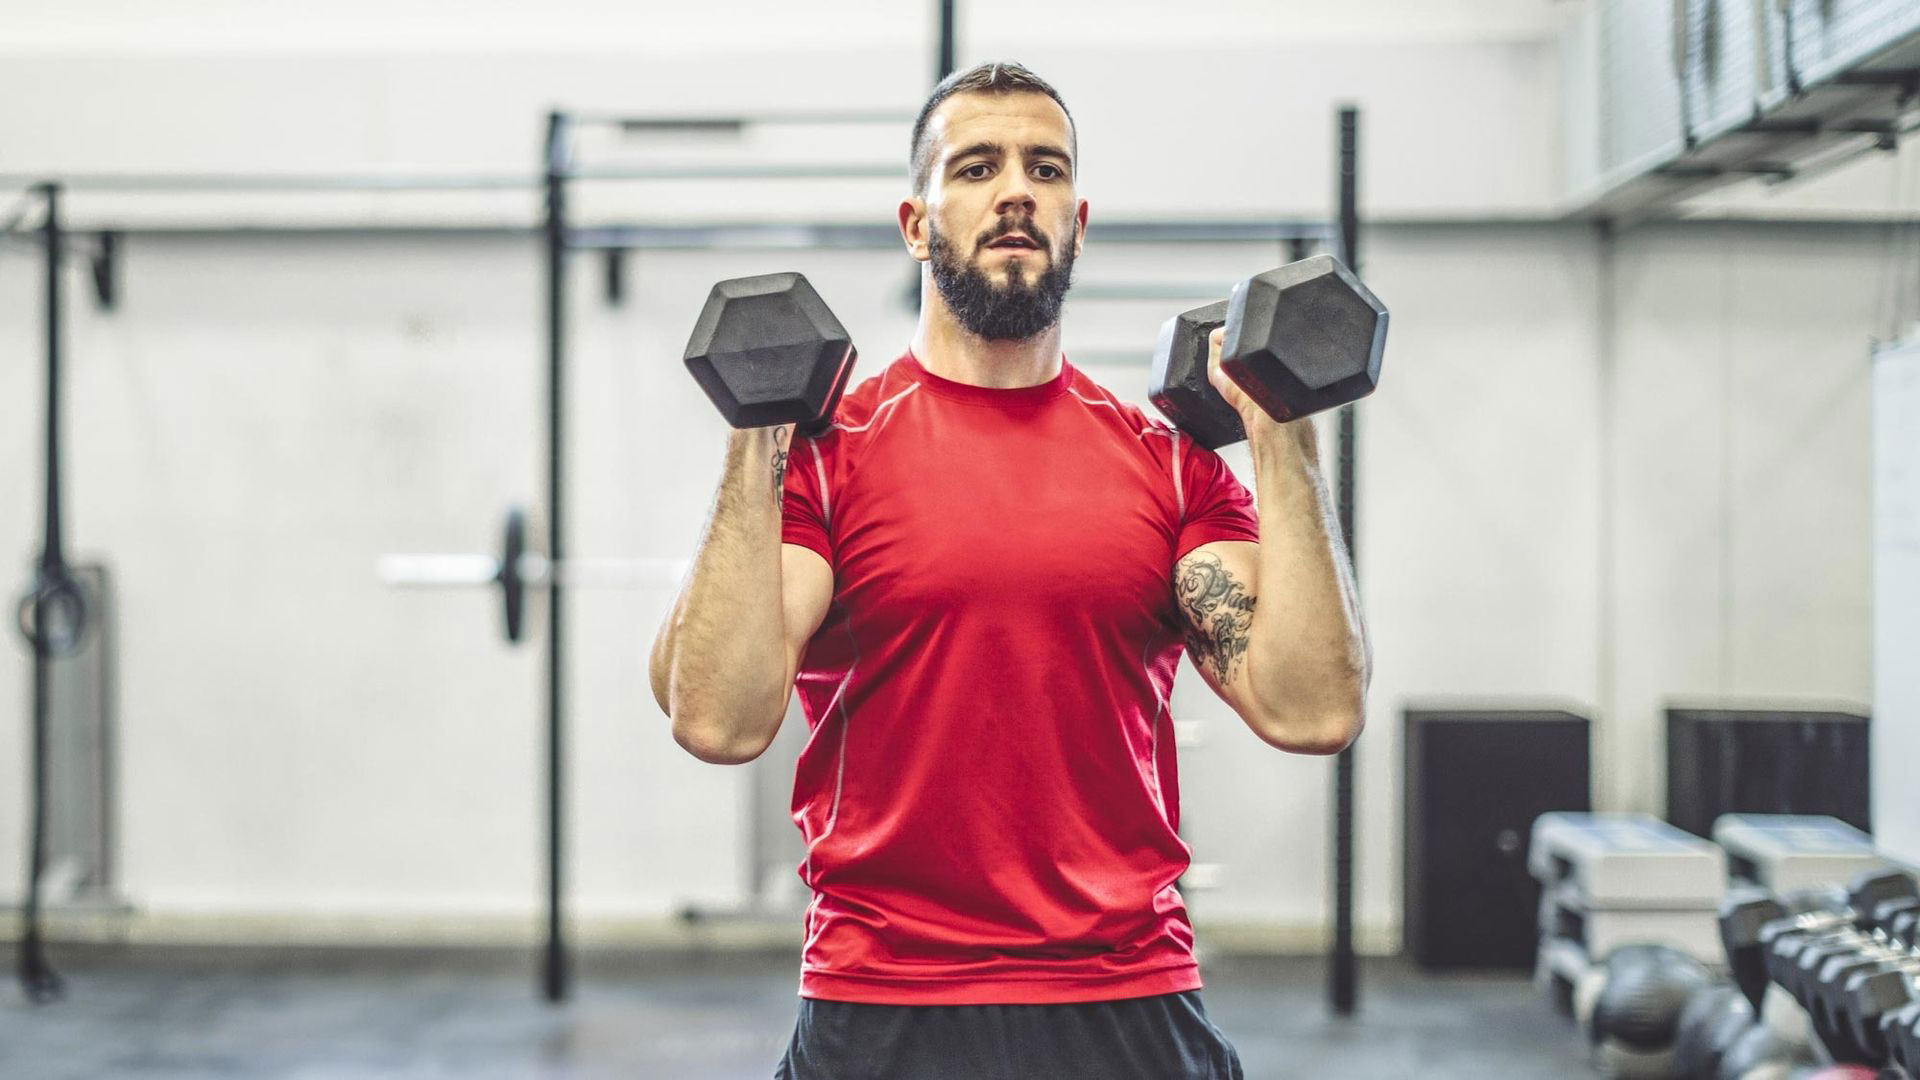 Forget the gym — you just need a pair of dumbbells and 6 exercises